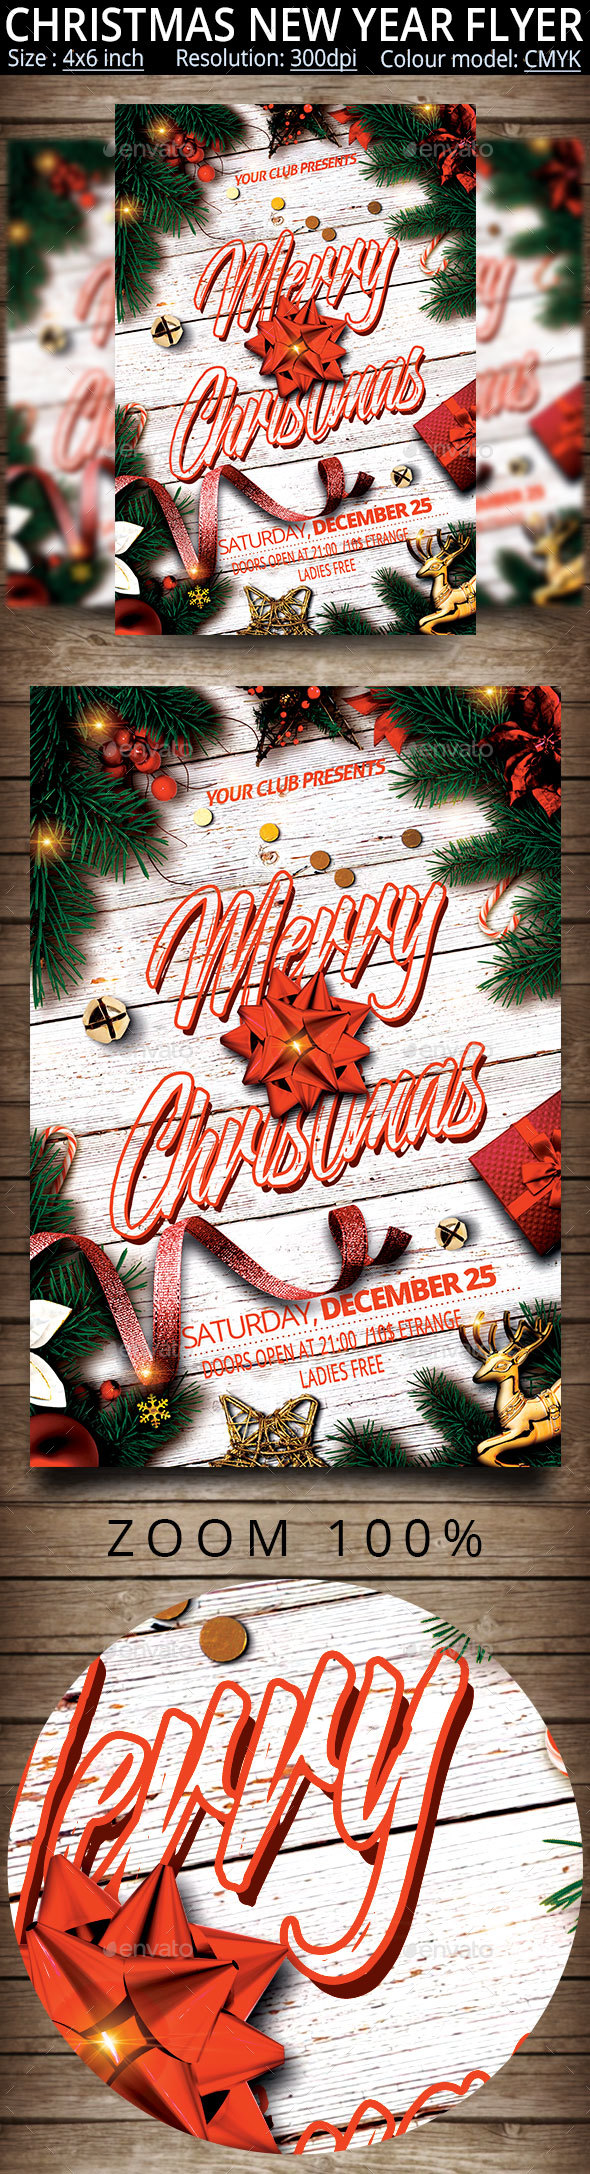 GraphicRiver Christmas New Year Party Flyer 20947706